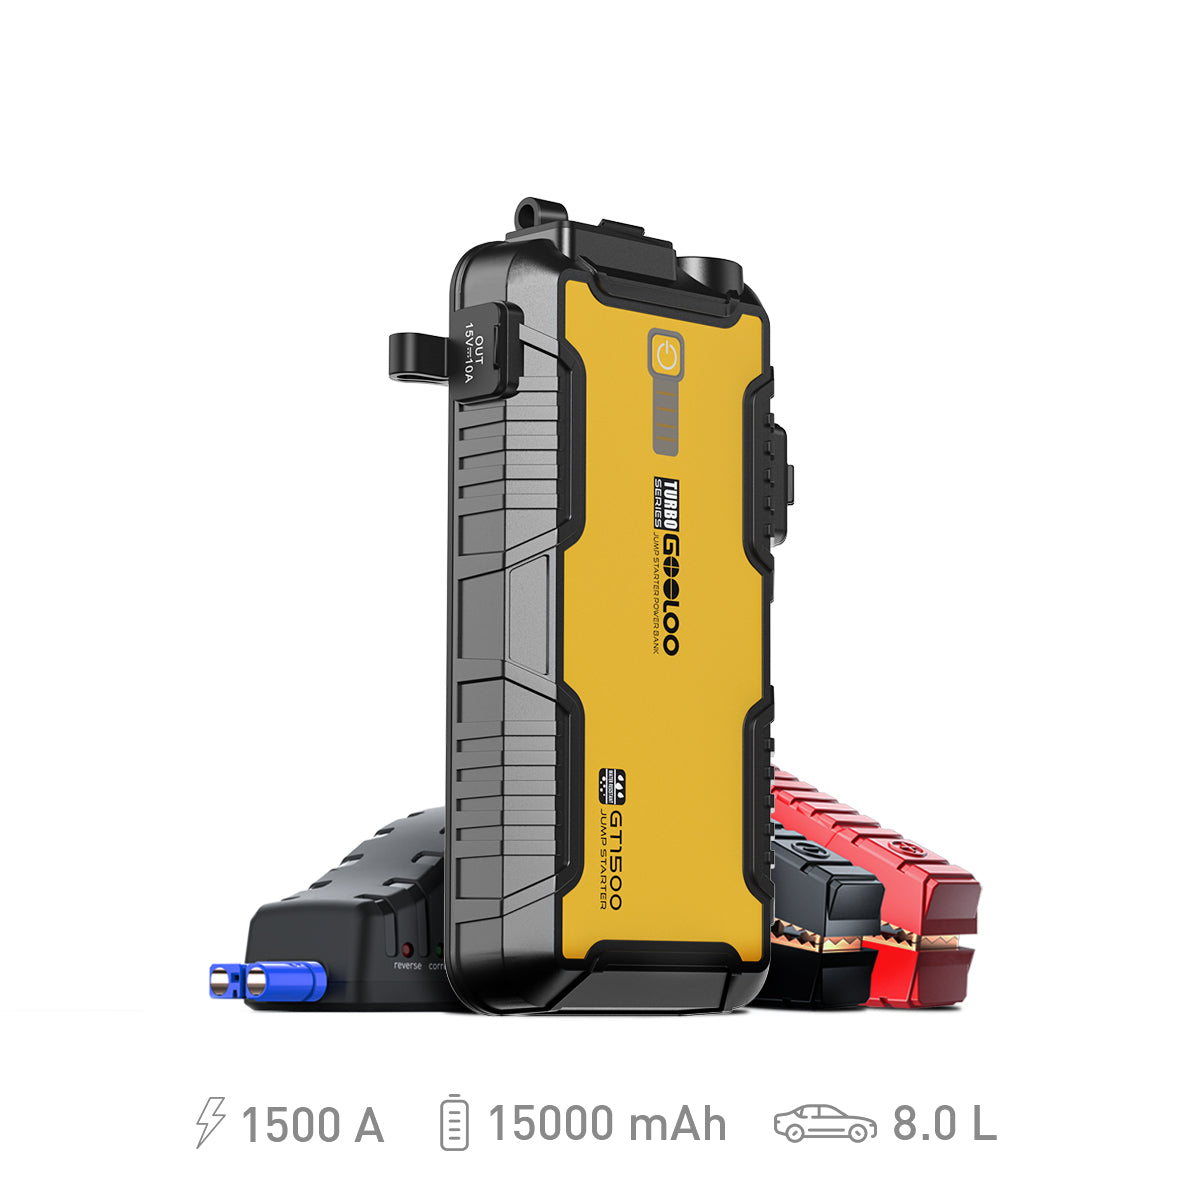 GooLoo GT3000 Battery Jump Starter Test and Review